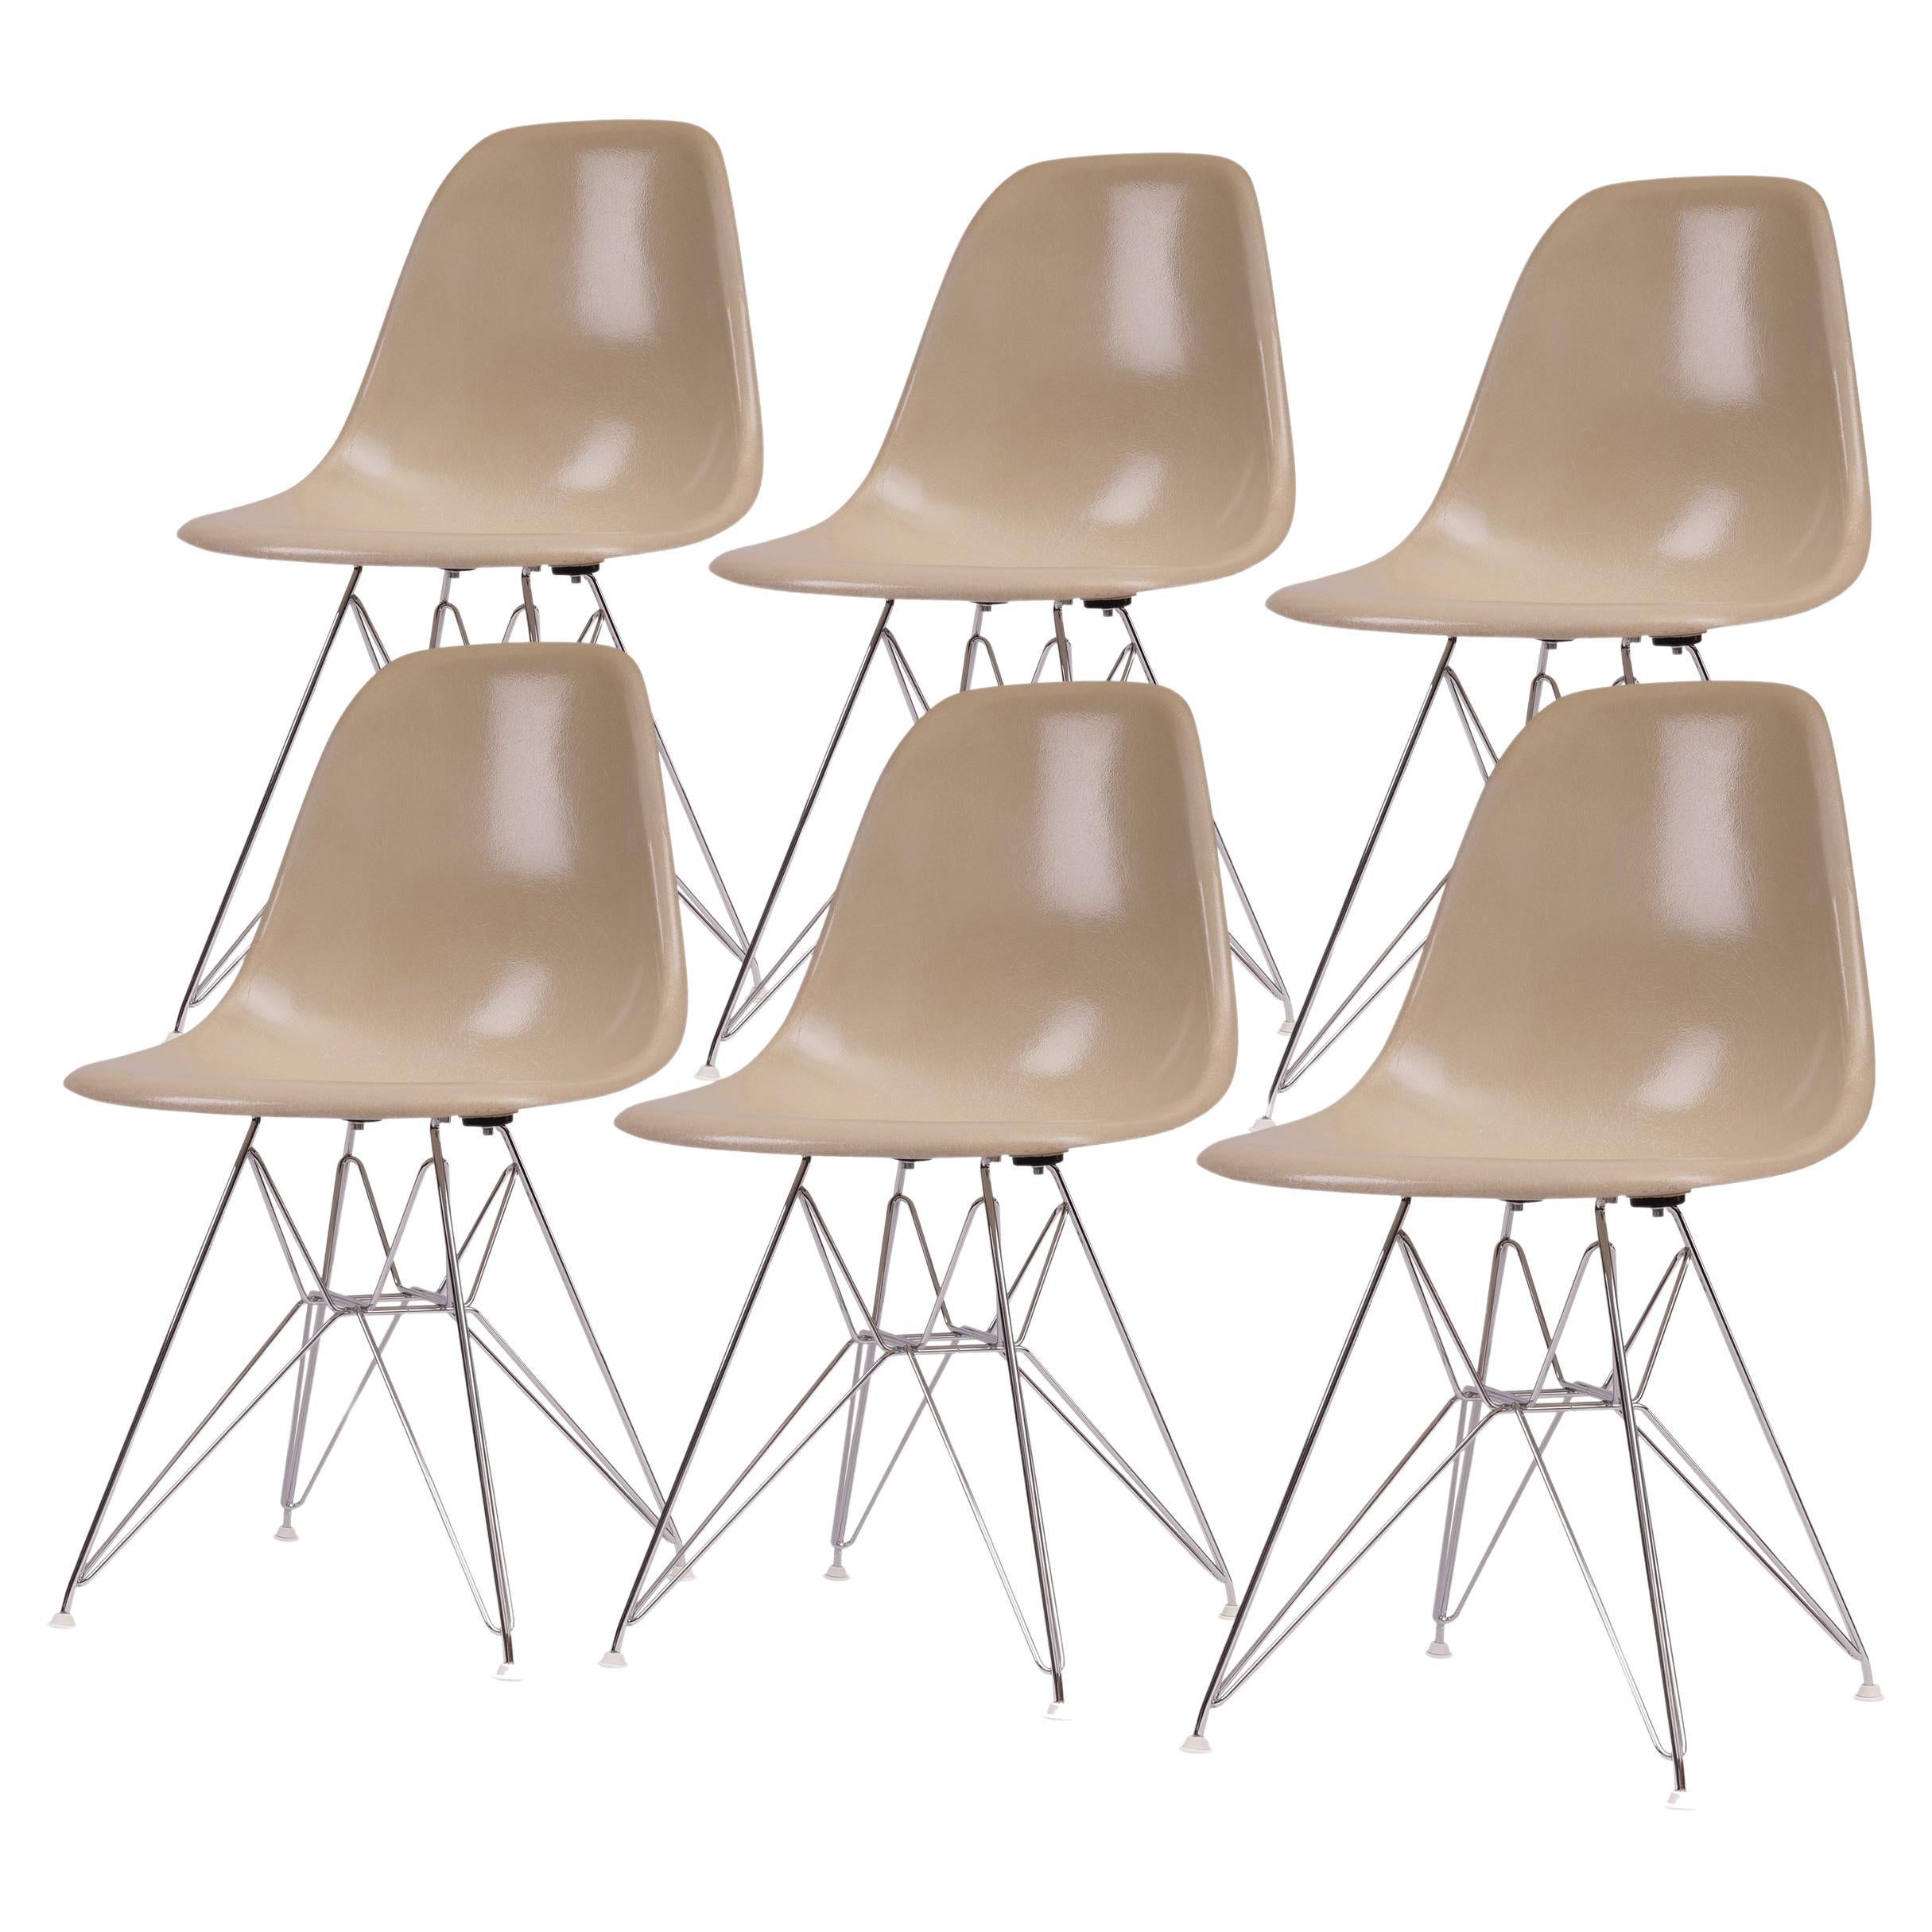 Set of 6 Charles and Ray Eames Fiberglass Sidechairs with Eiffelbase